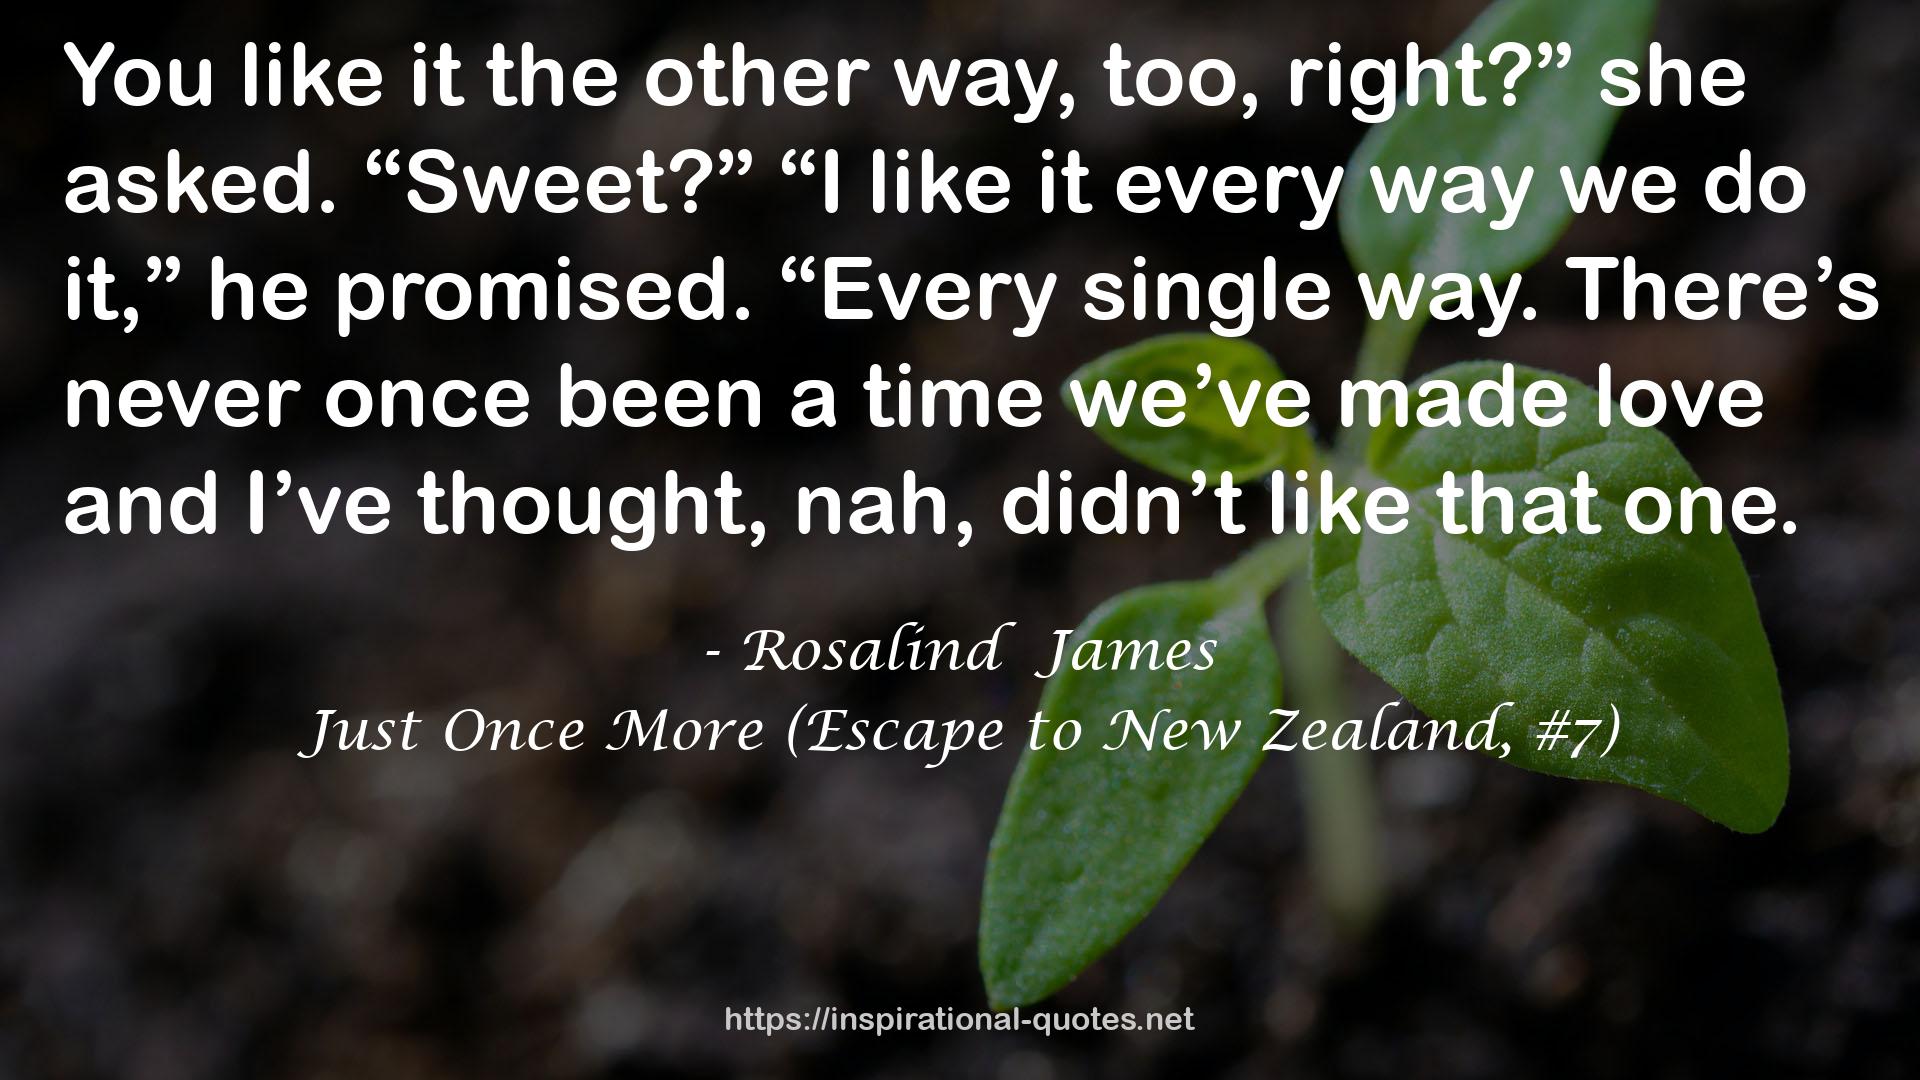 Just Once More (Escape to New Zealand, #7) QUOTES